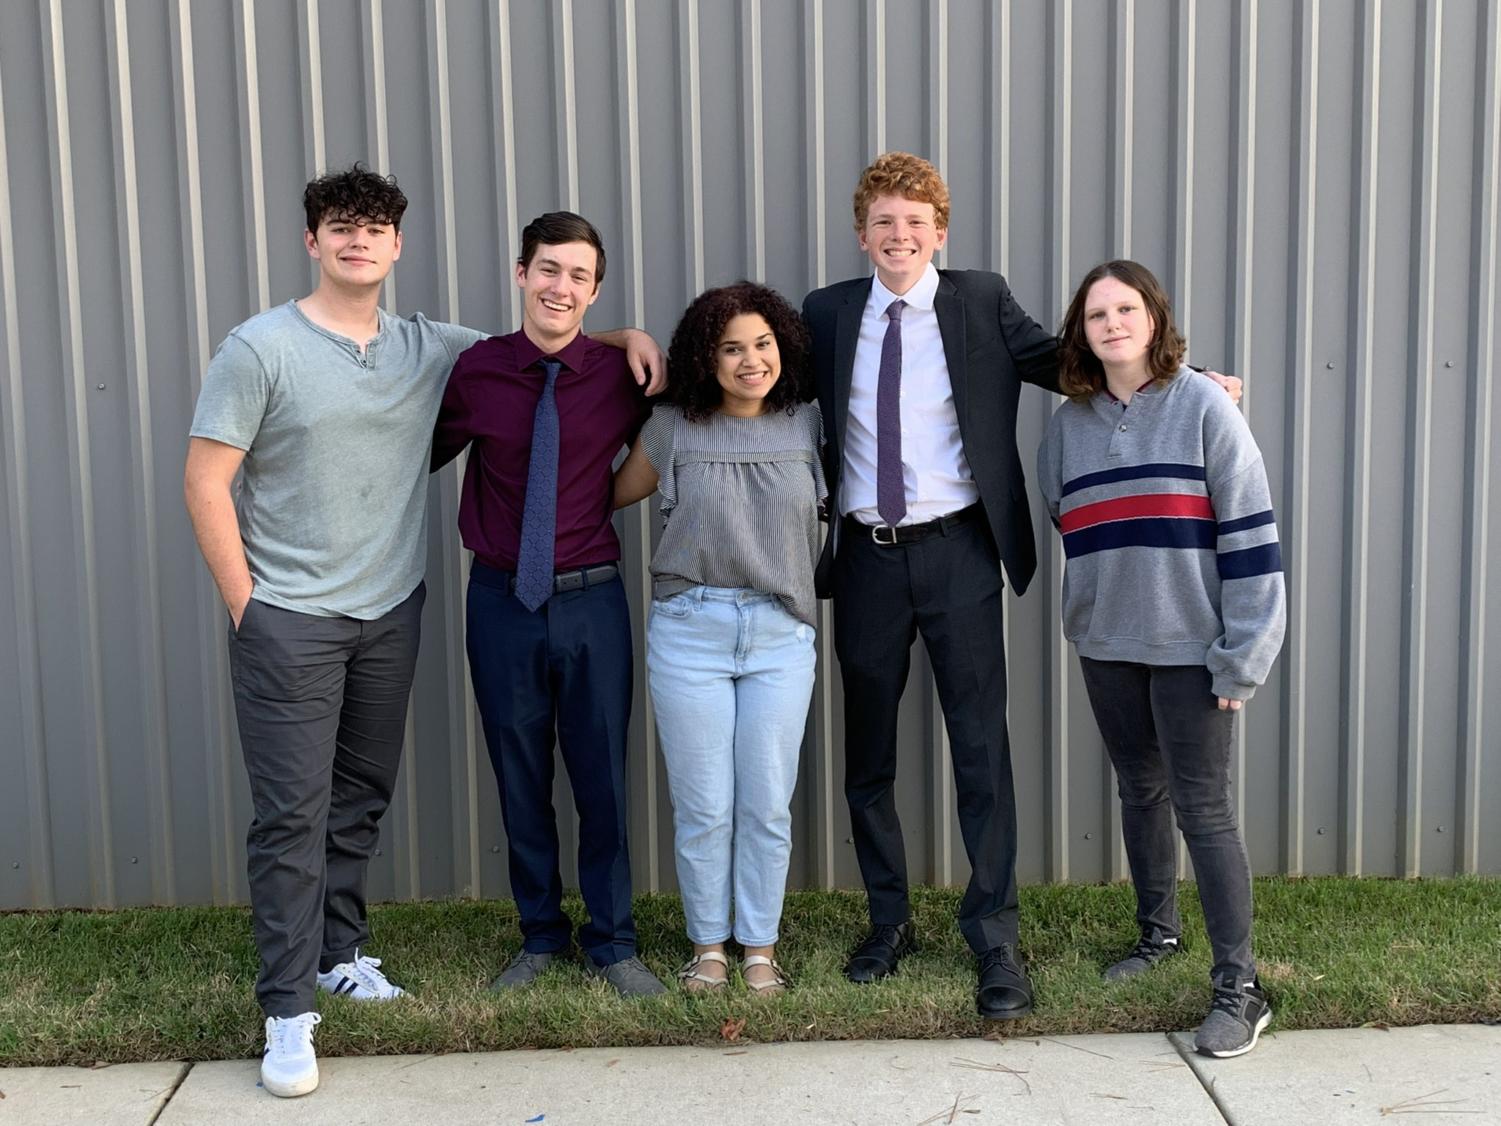 The members of the debate team competed at two meets this week.